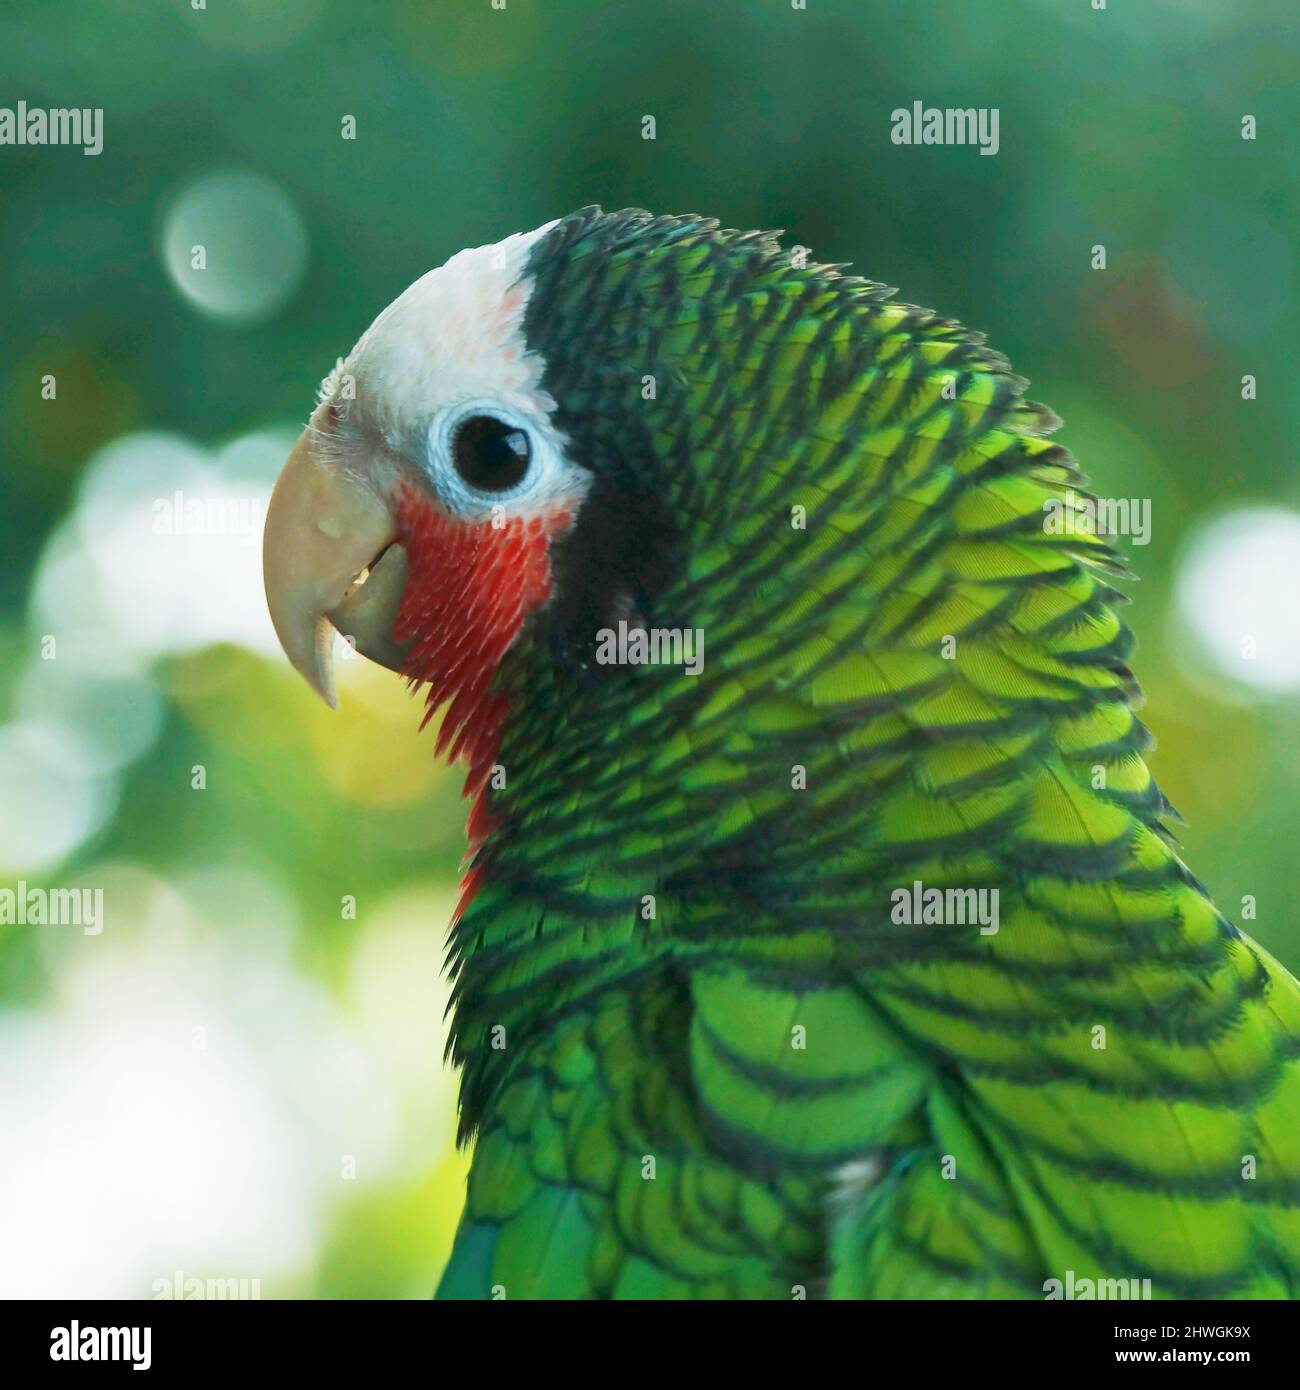 rose-throated amazon parrot bird in close up Stock Photo